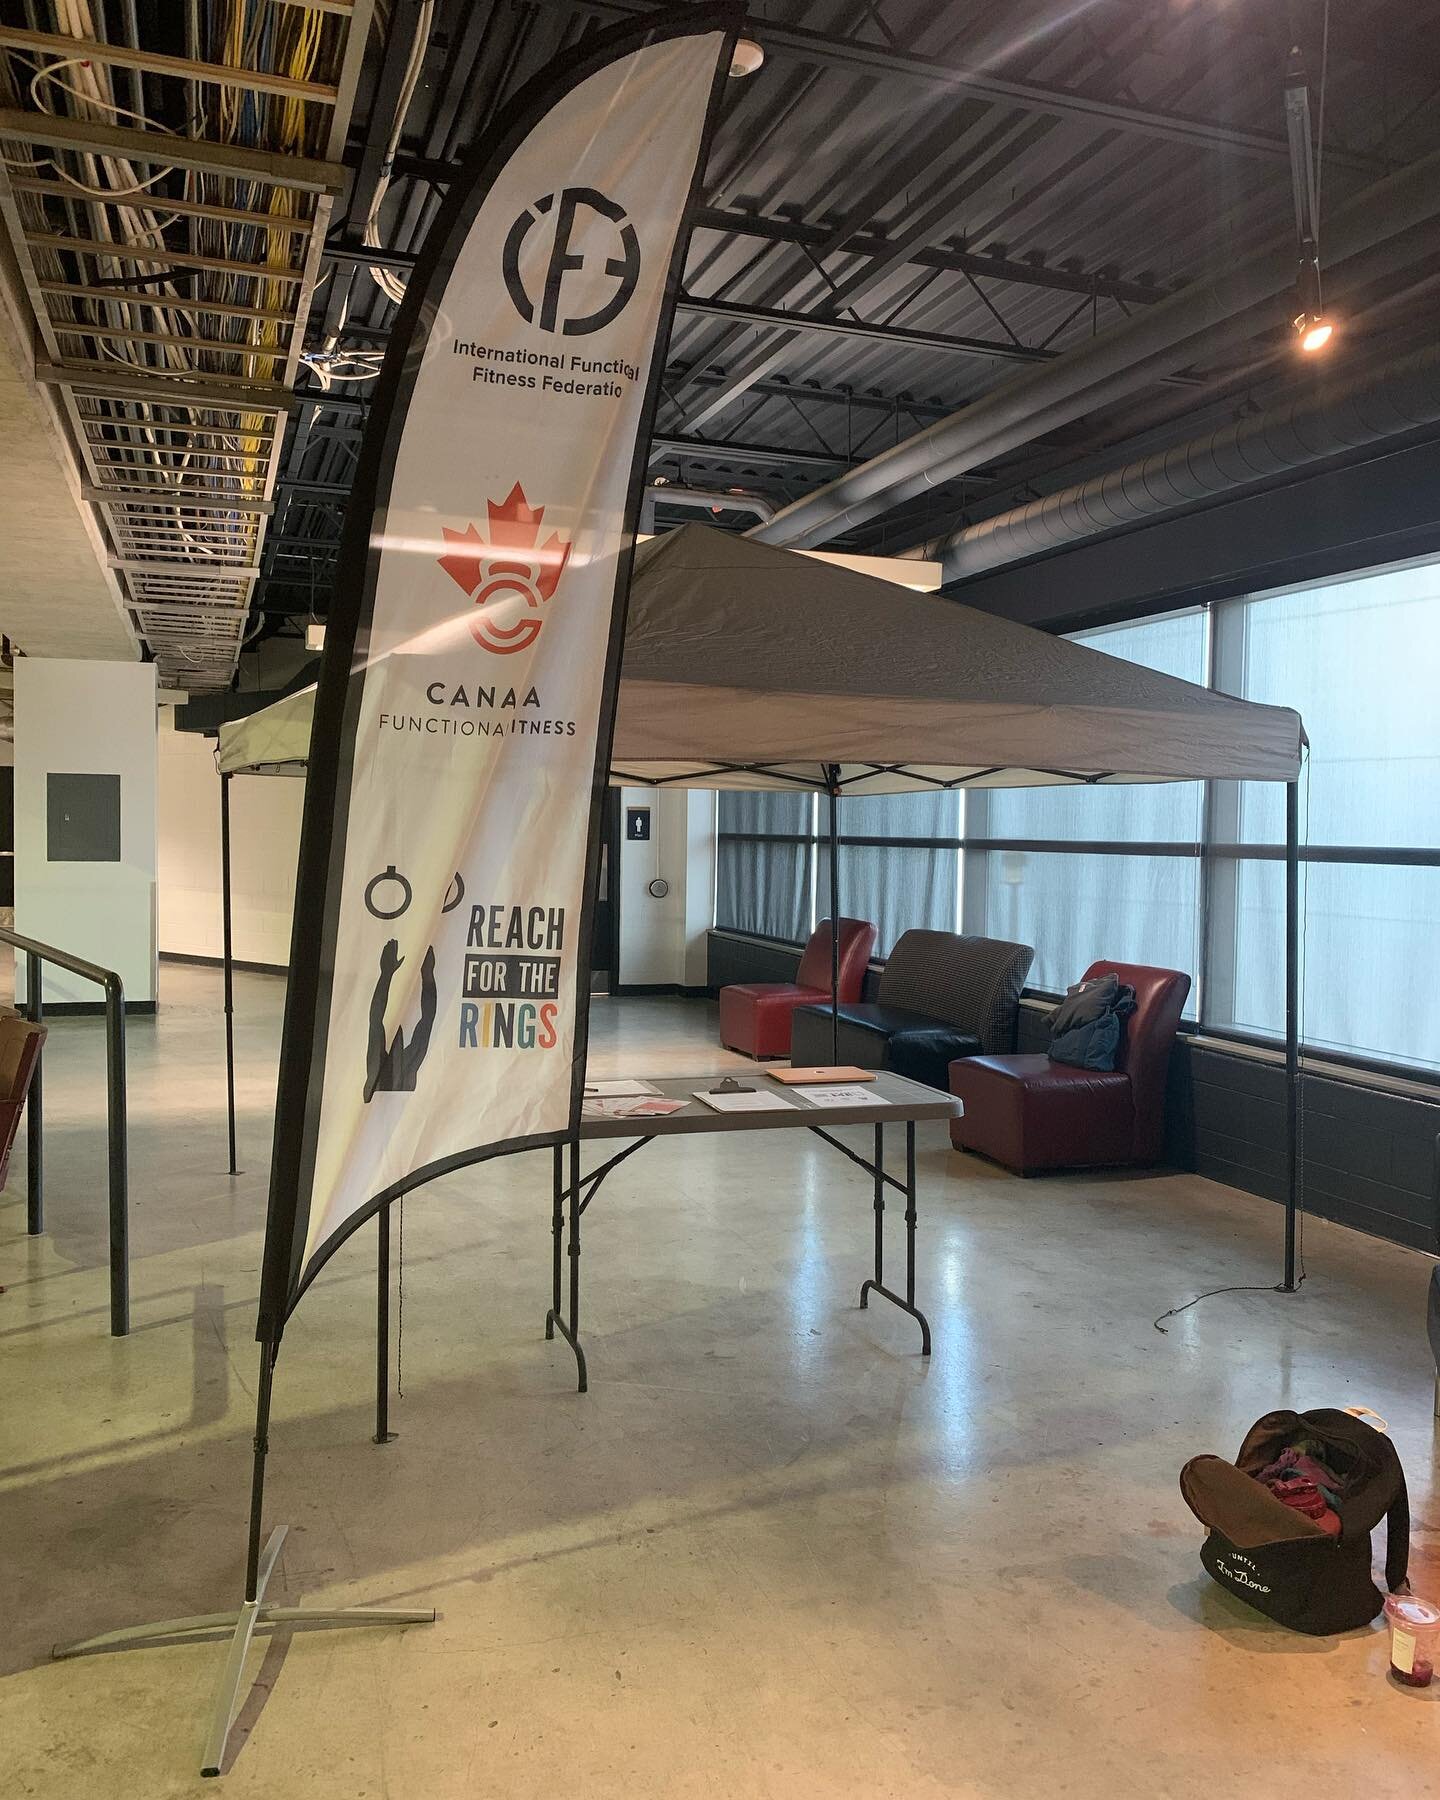 We are here @caneastgames to spread the word! 

Come visit us to learn more about our mission and vision of  having the sport of Functional Fitness recognized in Canada. 

#functionalfitness #sportsgovernance #grassroots